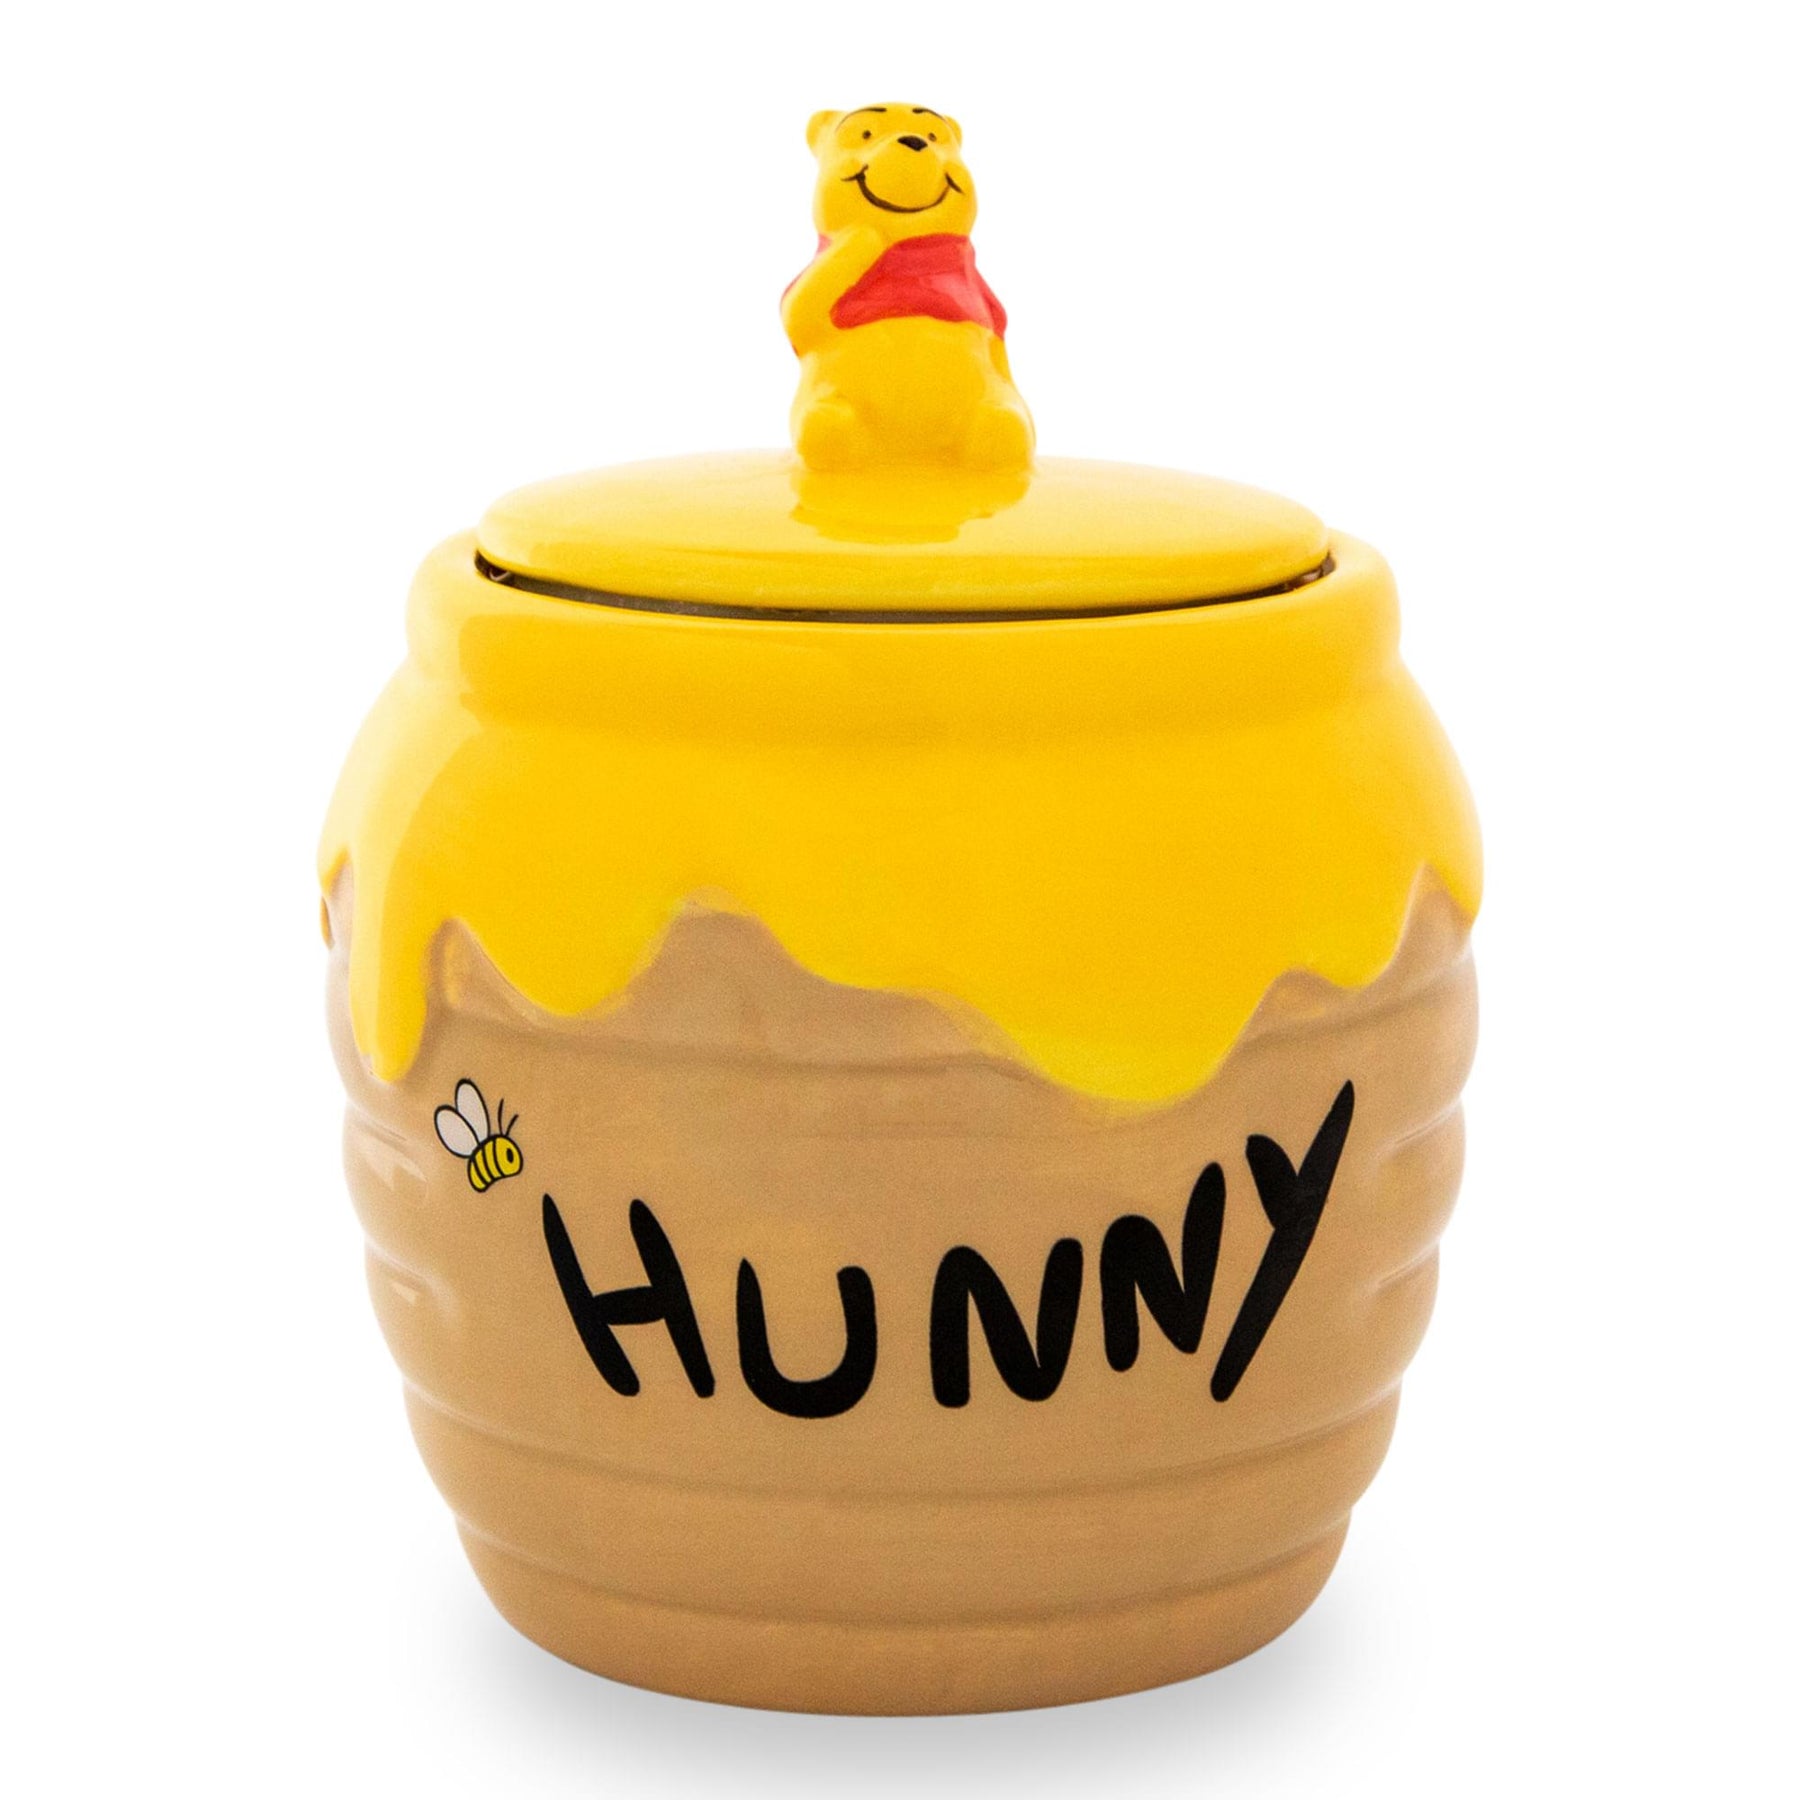 Springs Creative - Winnie The Pooh and Hunny Jar- Authentic Disney